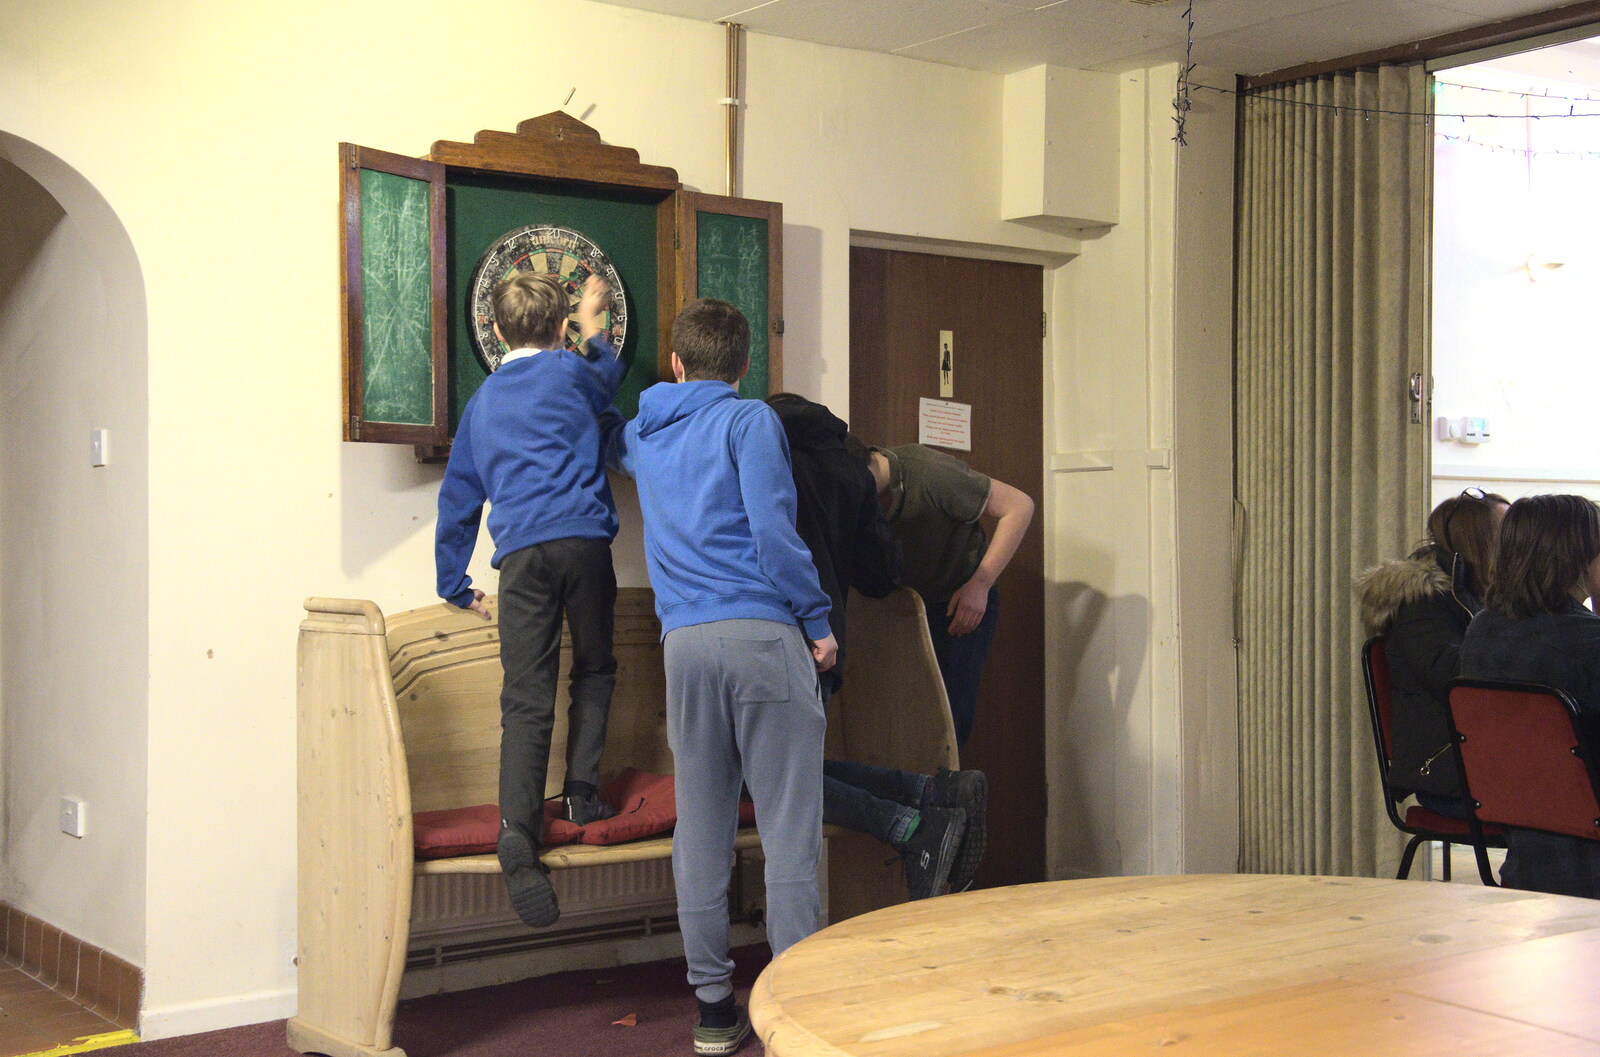 The boys pull their darts out of the board from Supercharged Electrons and Pizza at the Village Hall, Brome, Suffolk - 23rd January 2022